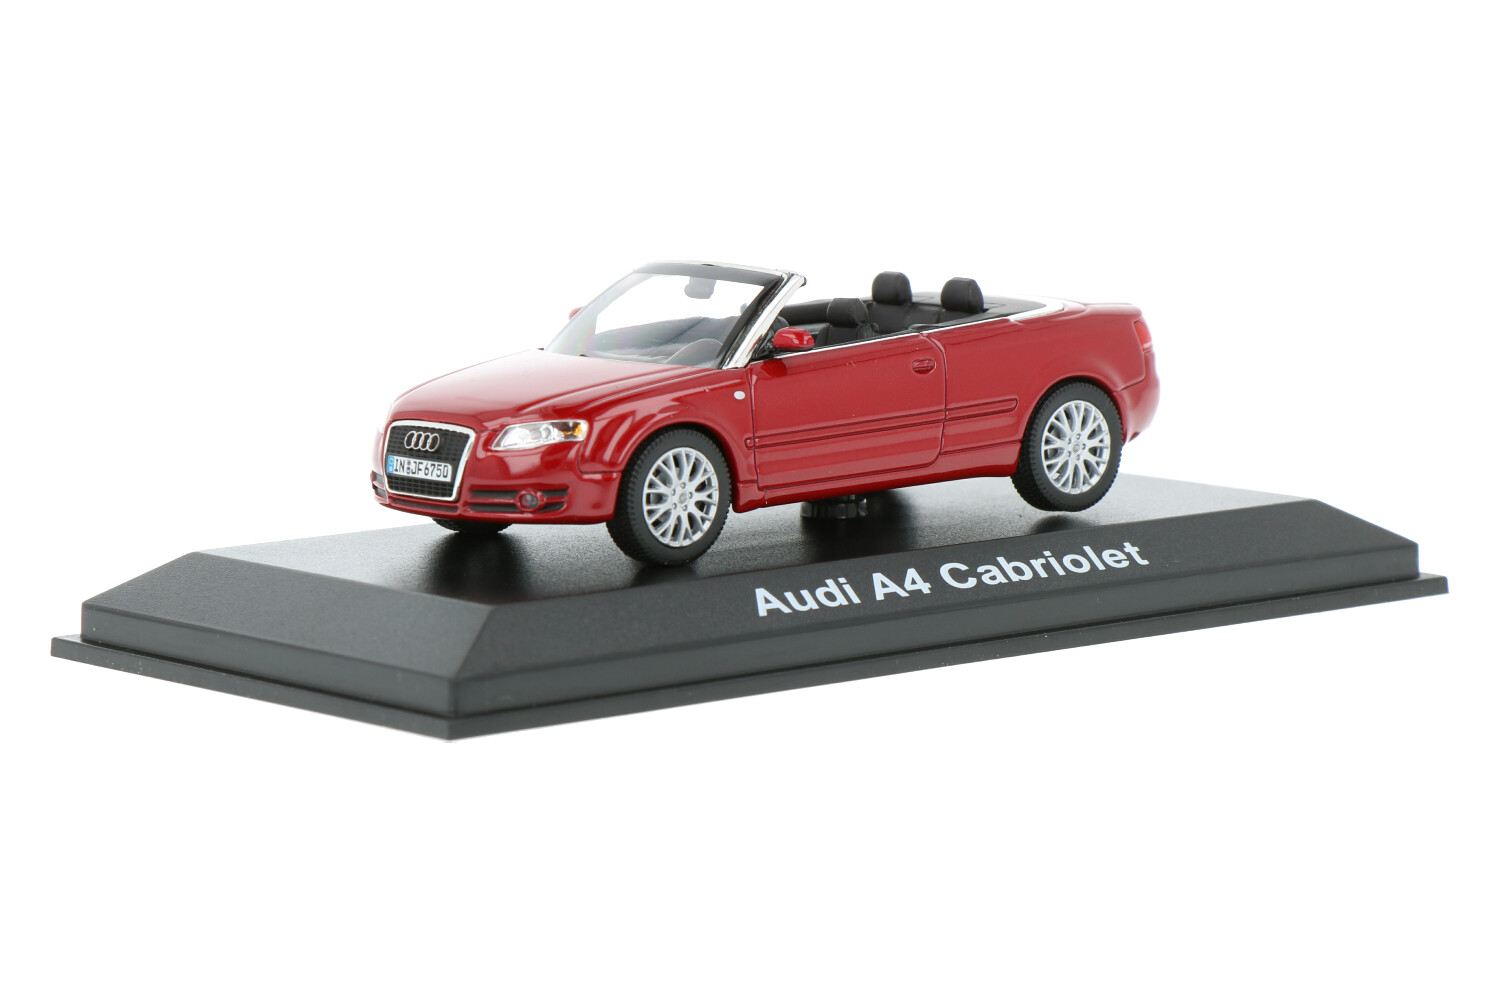 Audi-A4-Cabriolet-830005_13153551098300055-Norev_Houseofmodelcars_.jpg